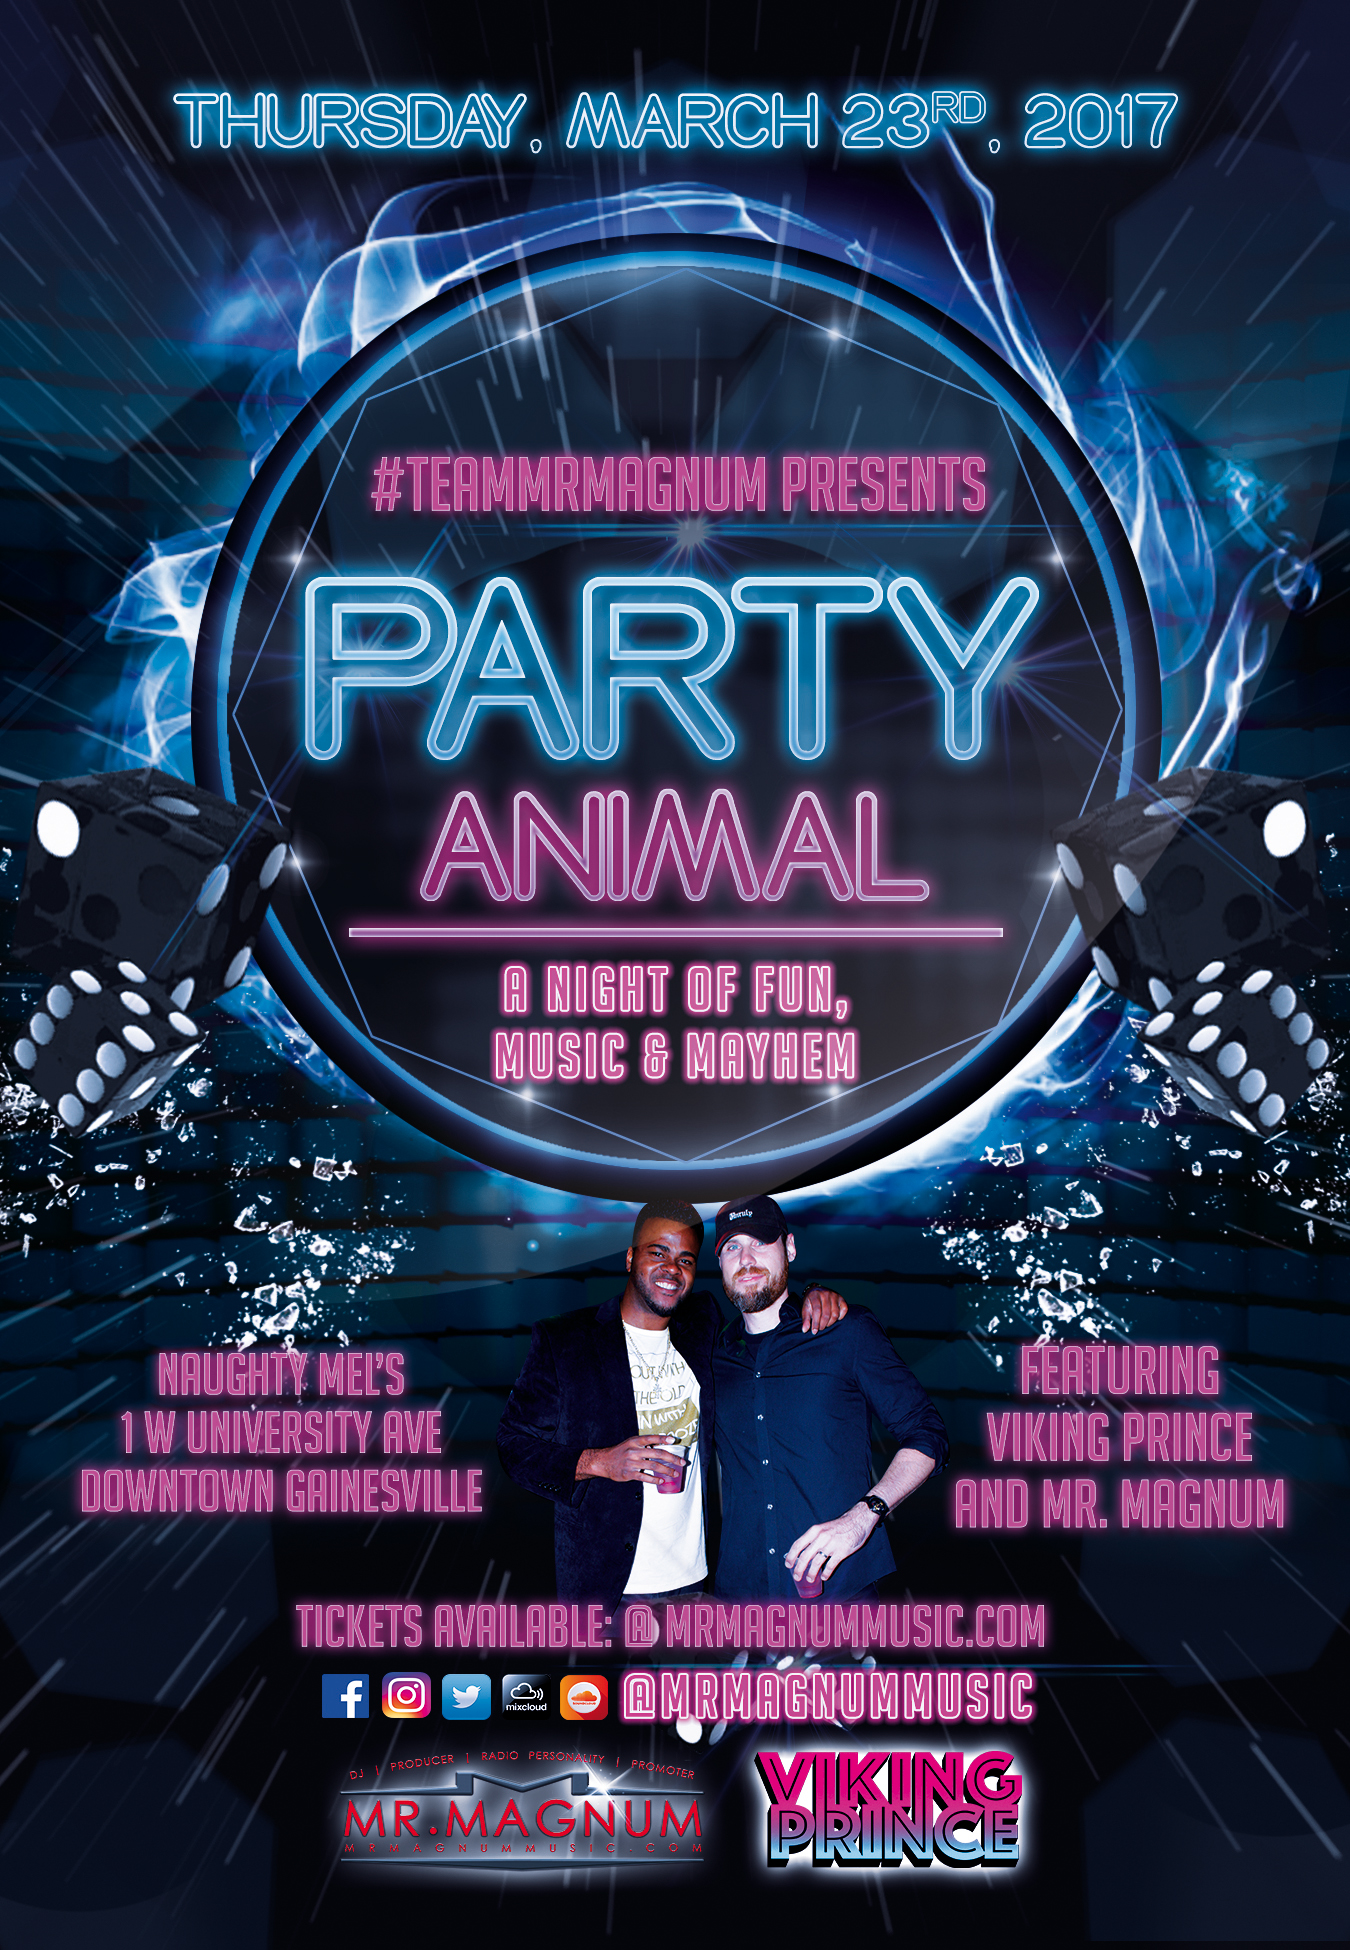 Flyer for the event, Party Animal, @ Sweet Mel's in Gainesville, Thursday, March 23rd, featuring Gainesville's #1 DJ, Mr. Magnum, and Viking Prince